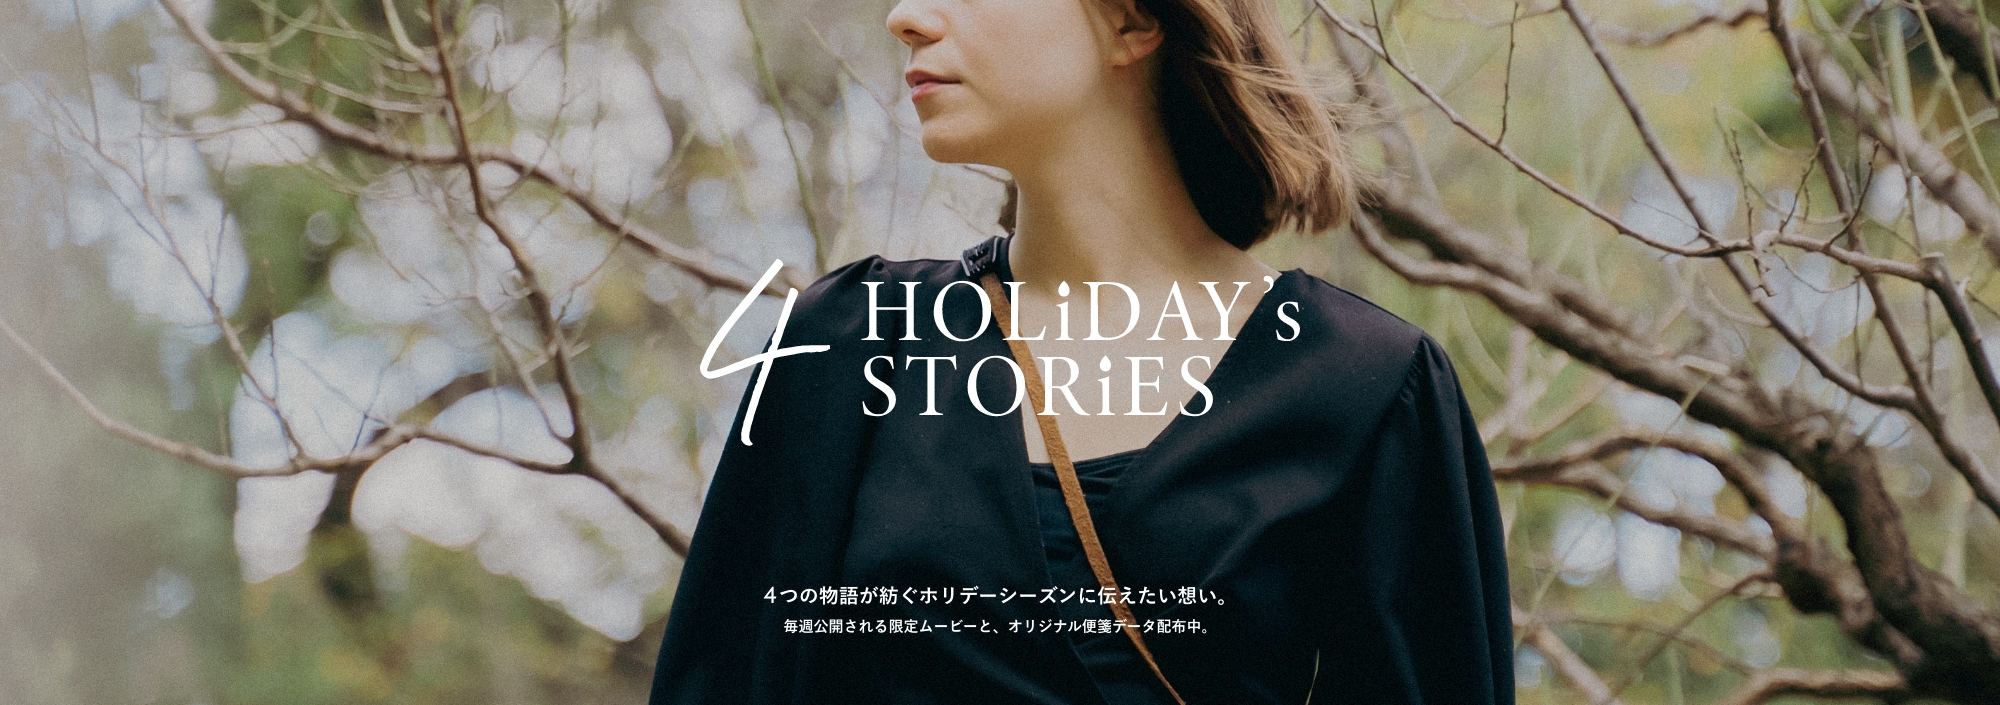 4HOLiDAY's STORiES